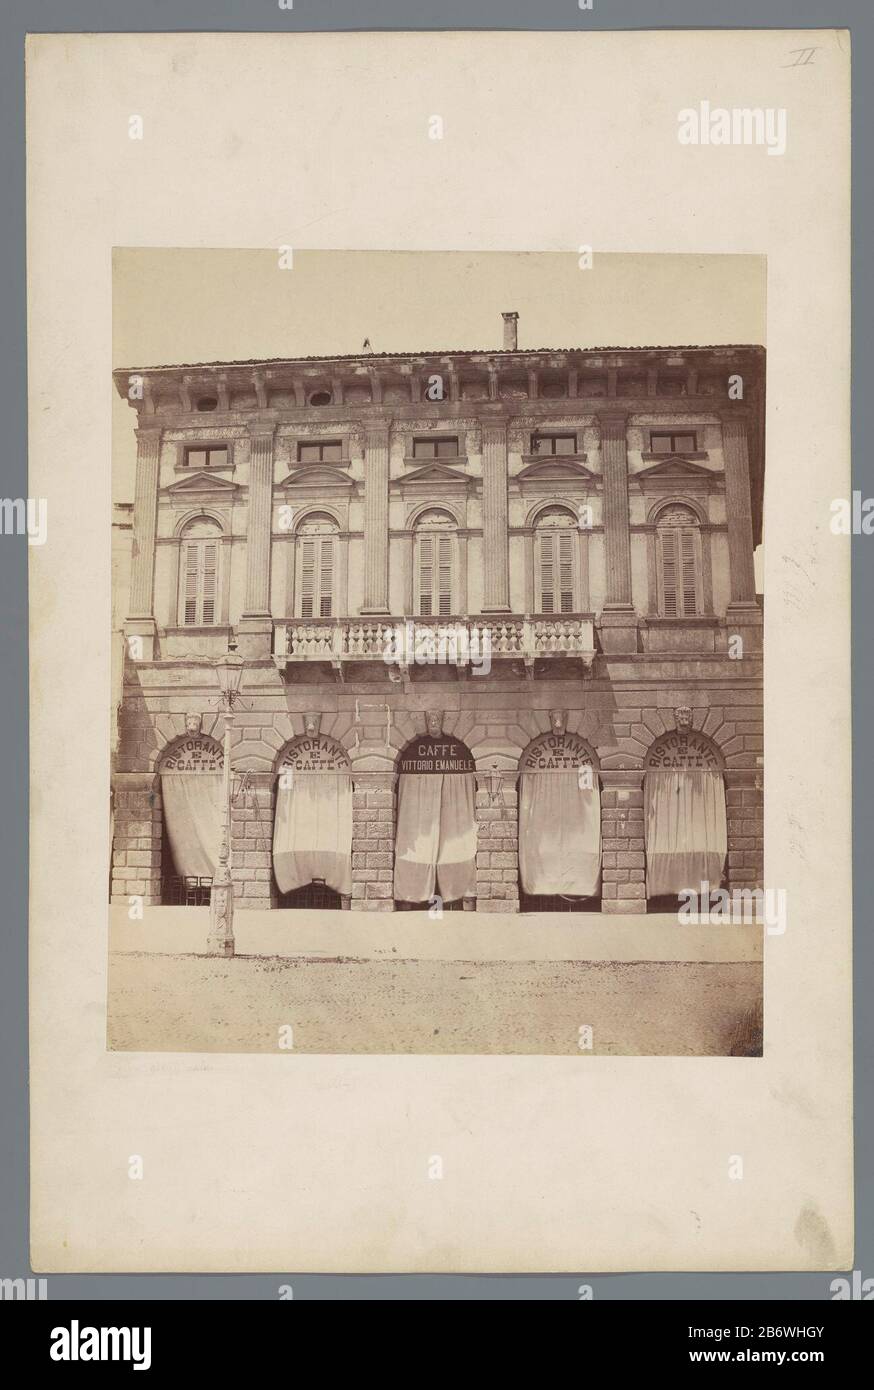 Italiaanse architectuur Italian Architecture object type: Picture Item Number: RP-F 00-5408 Dimensions: H 310 mm × W 254 mm Stockfoto